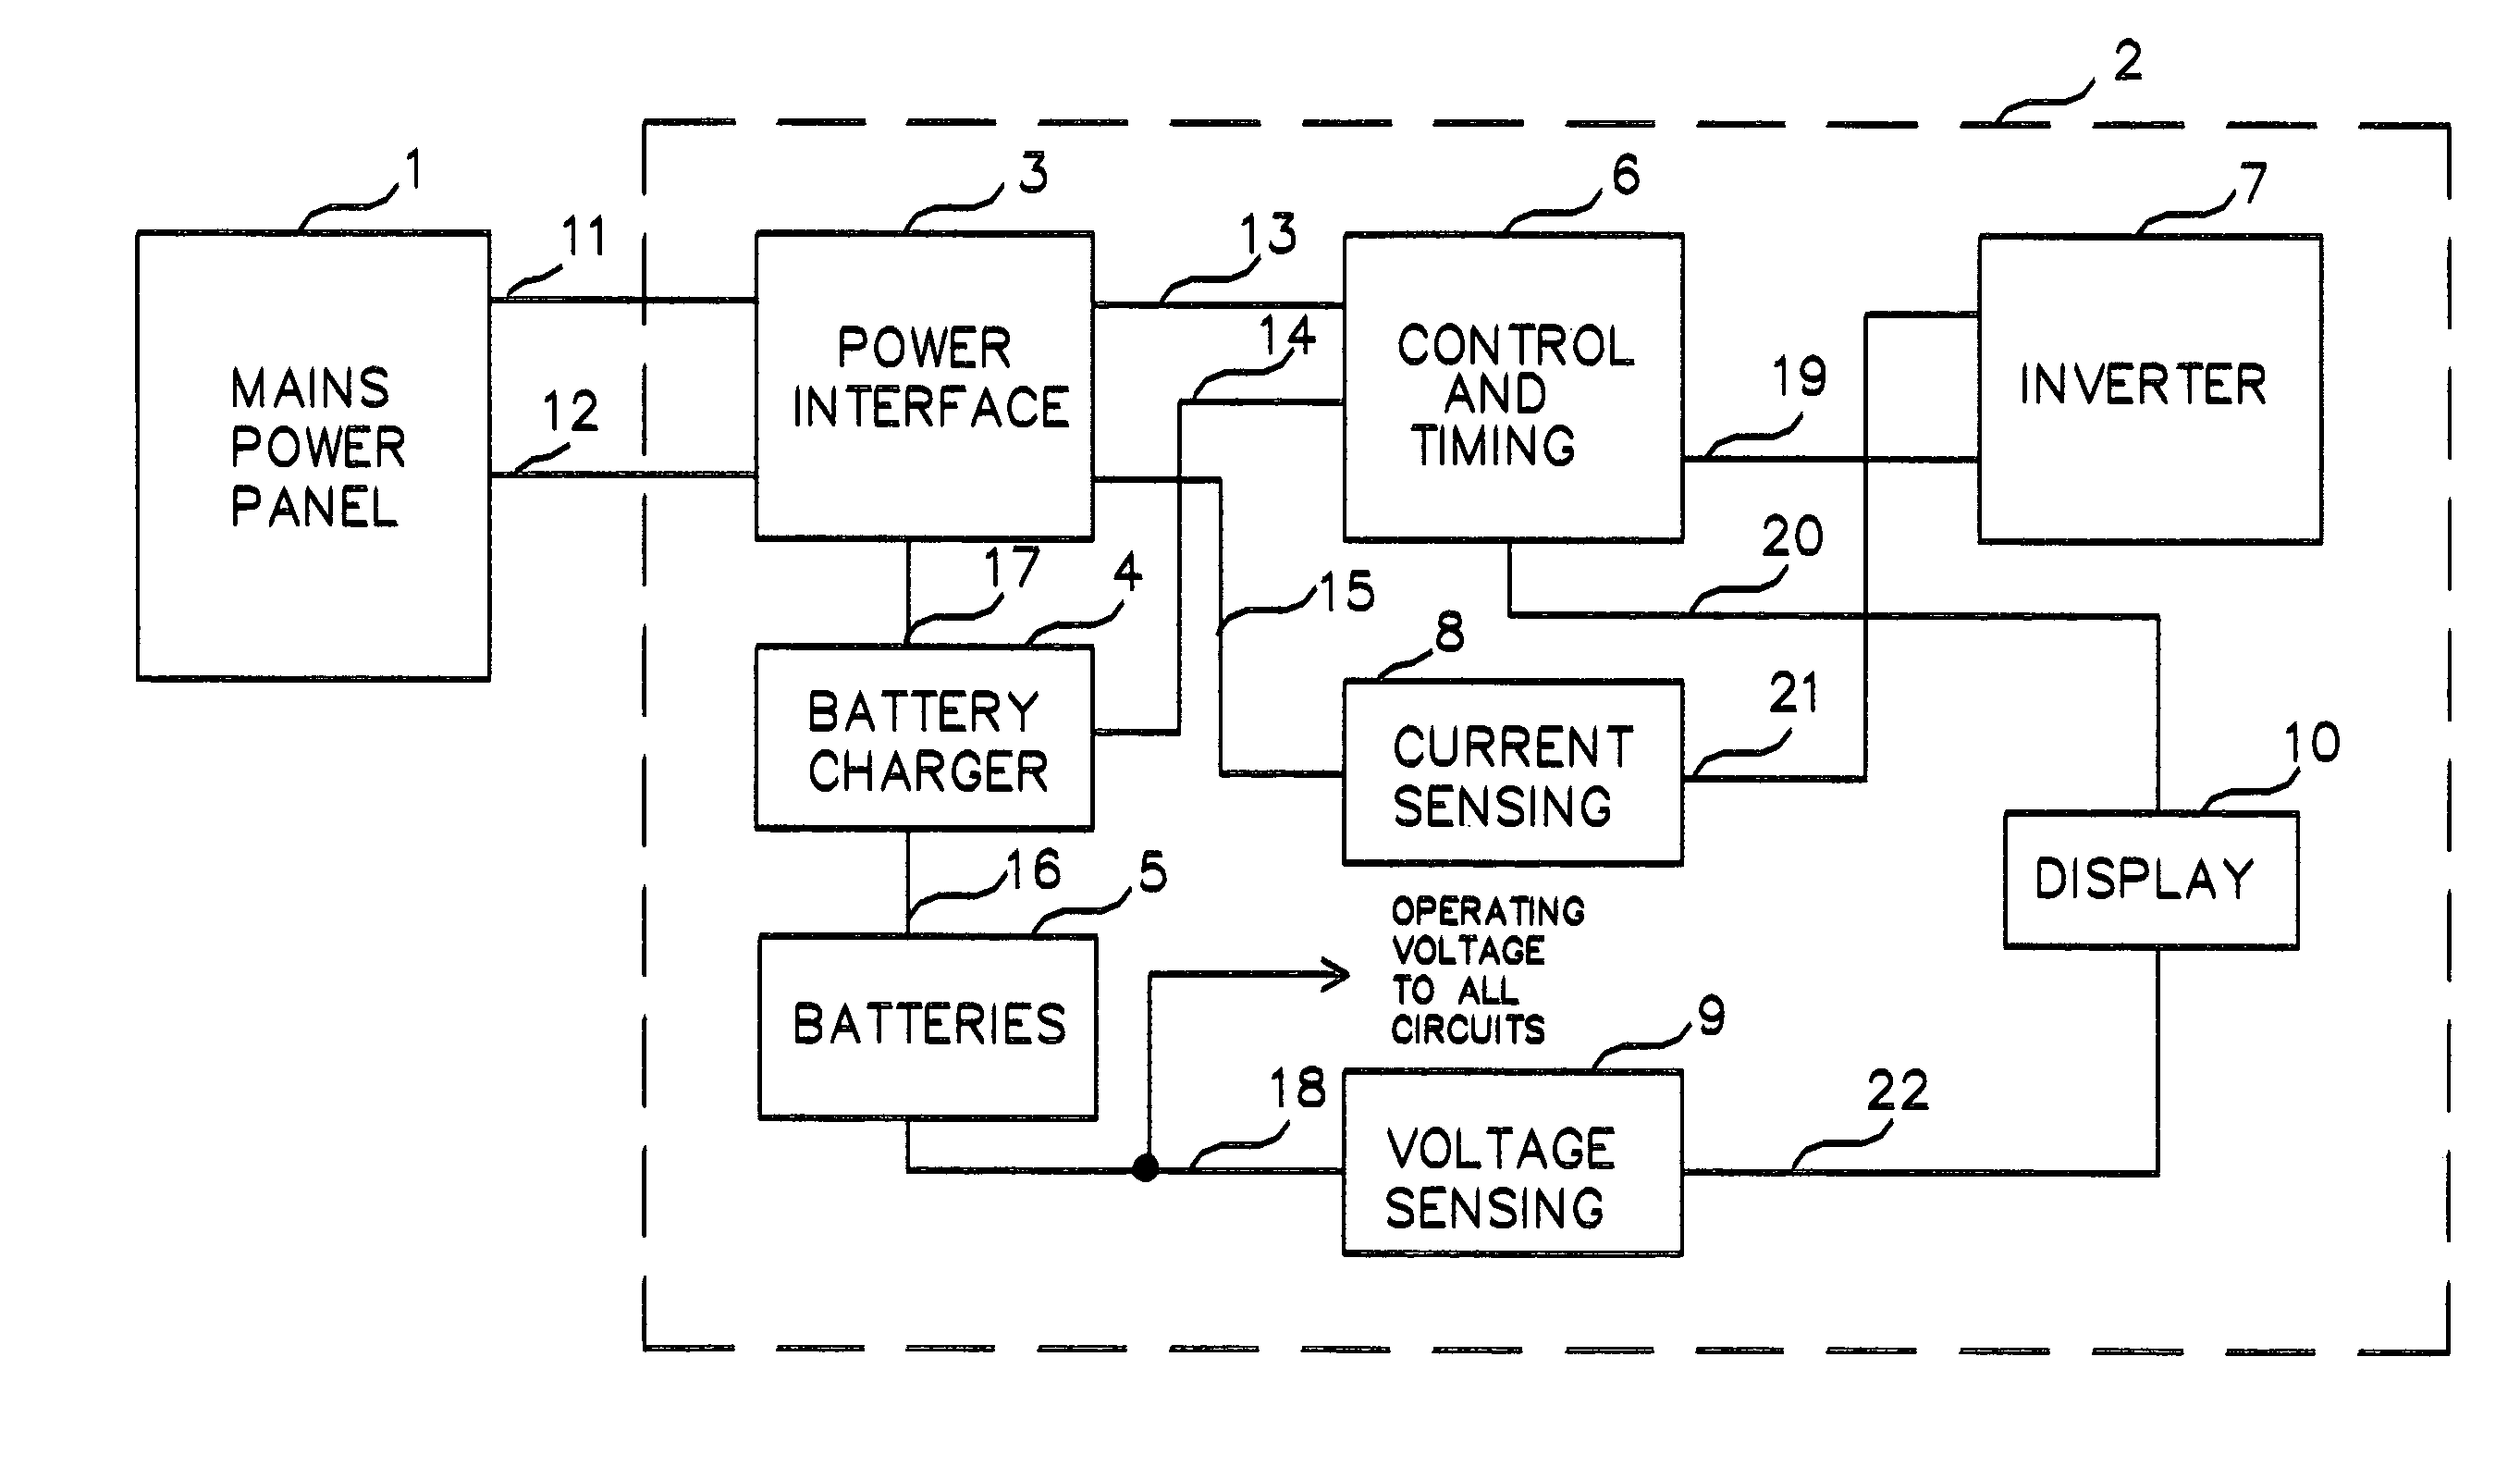 Backup power system for electrical appliances